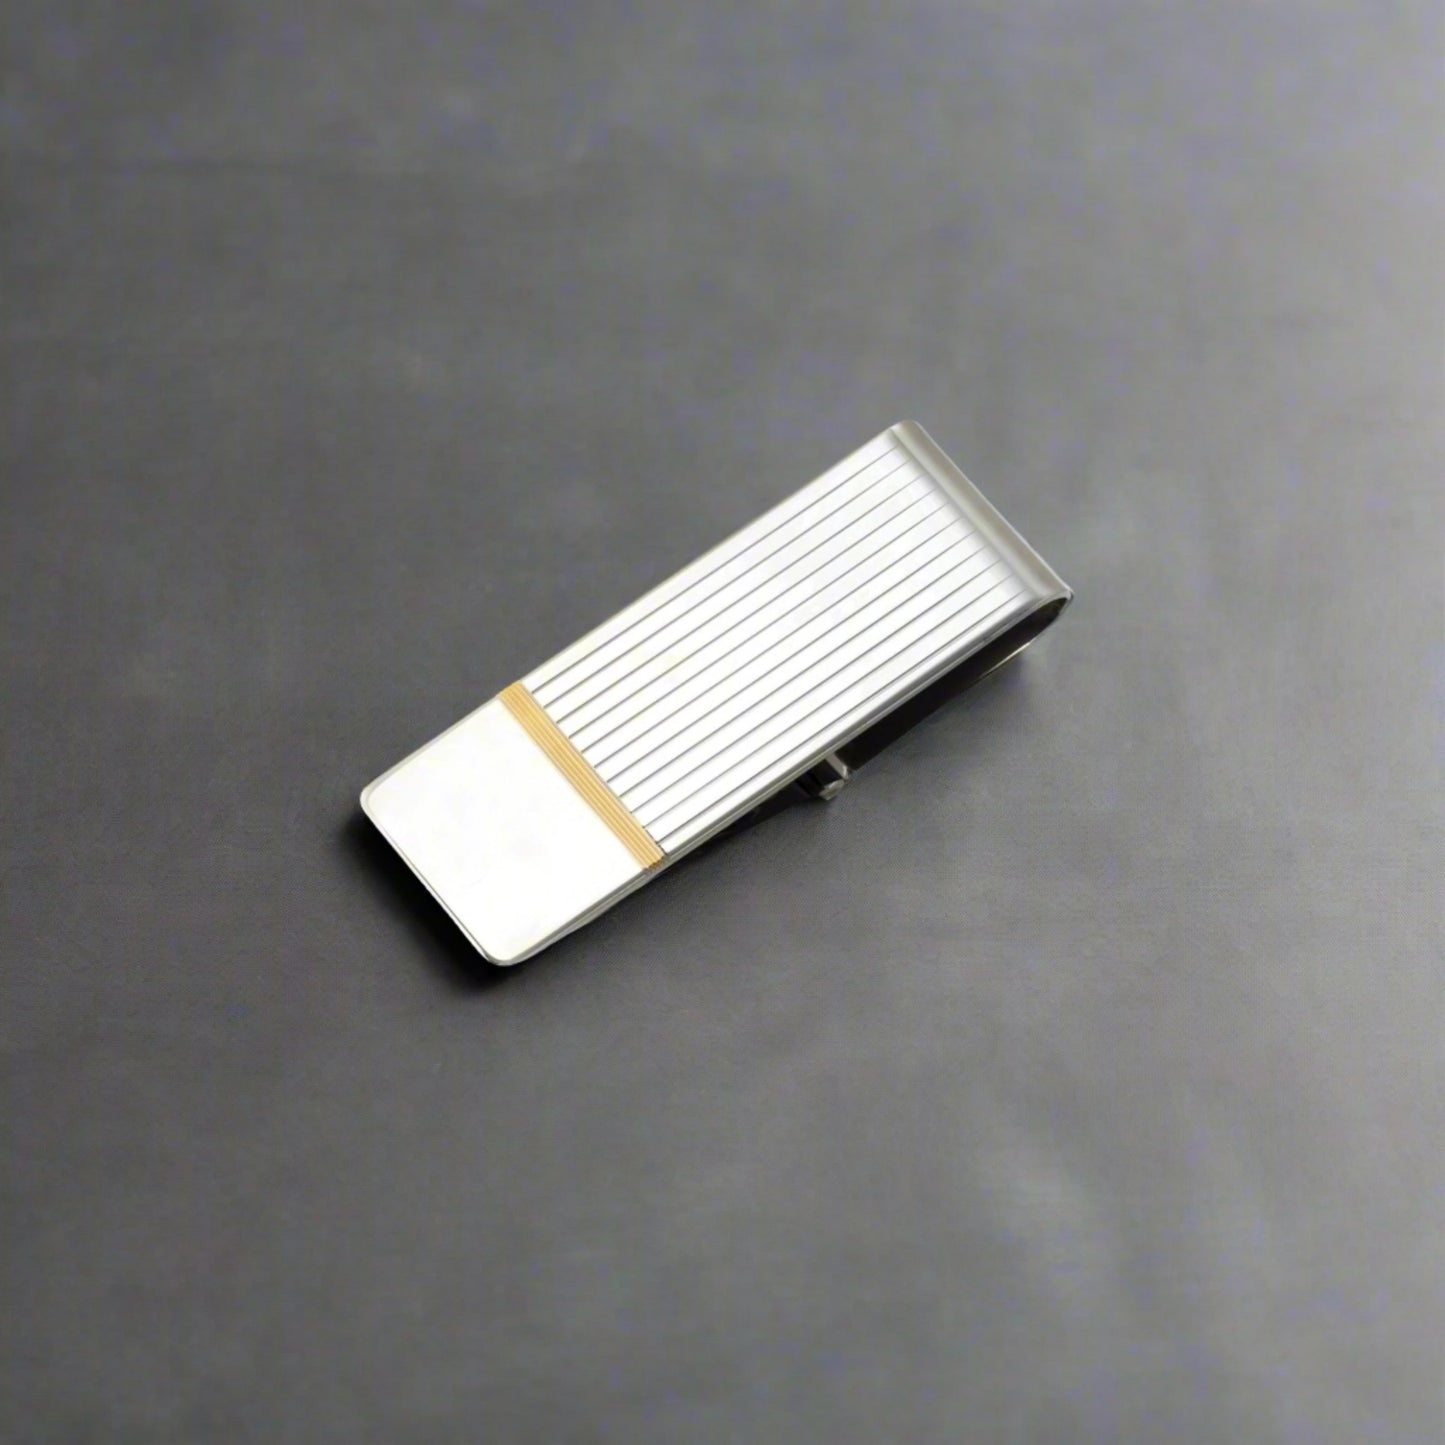 Sterling Silver and Gold Plate Hinged Money Clip with Linear Engine Turned Design and End Signet